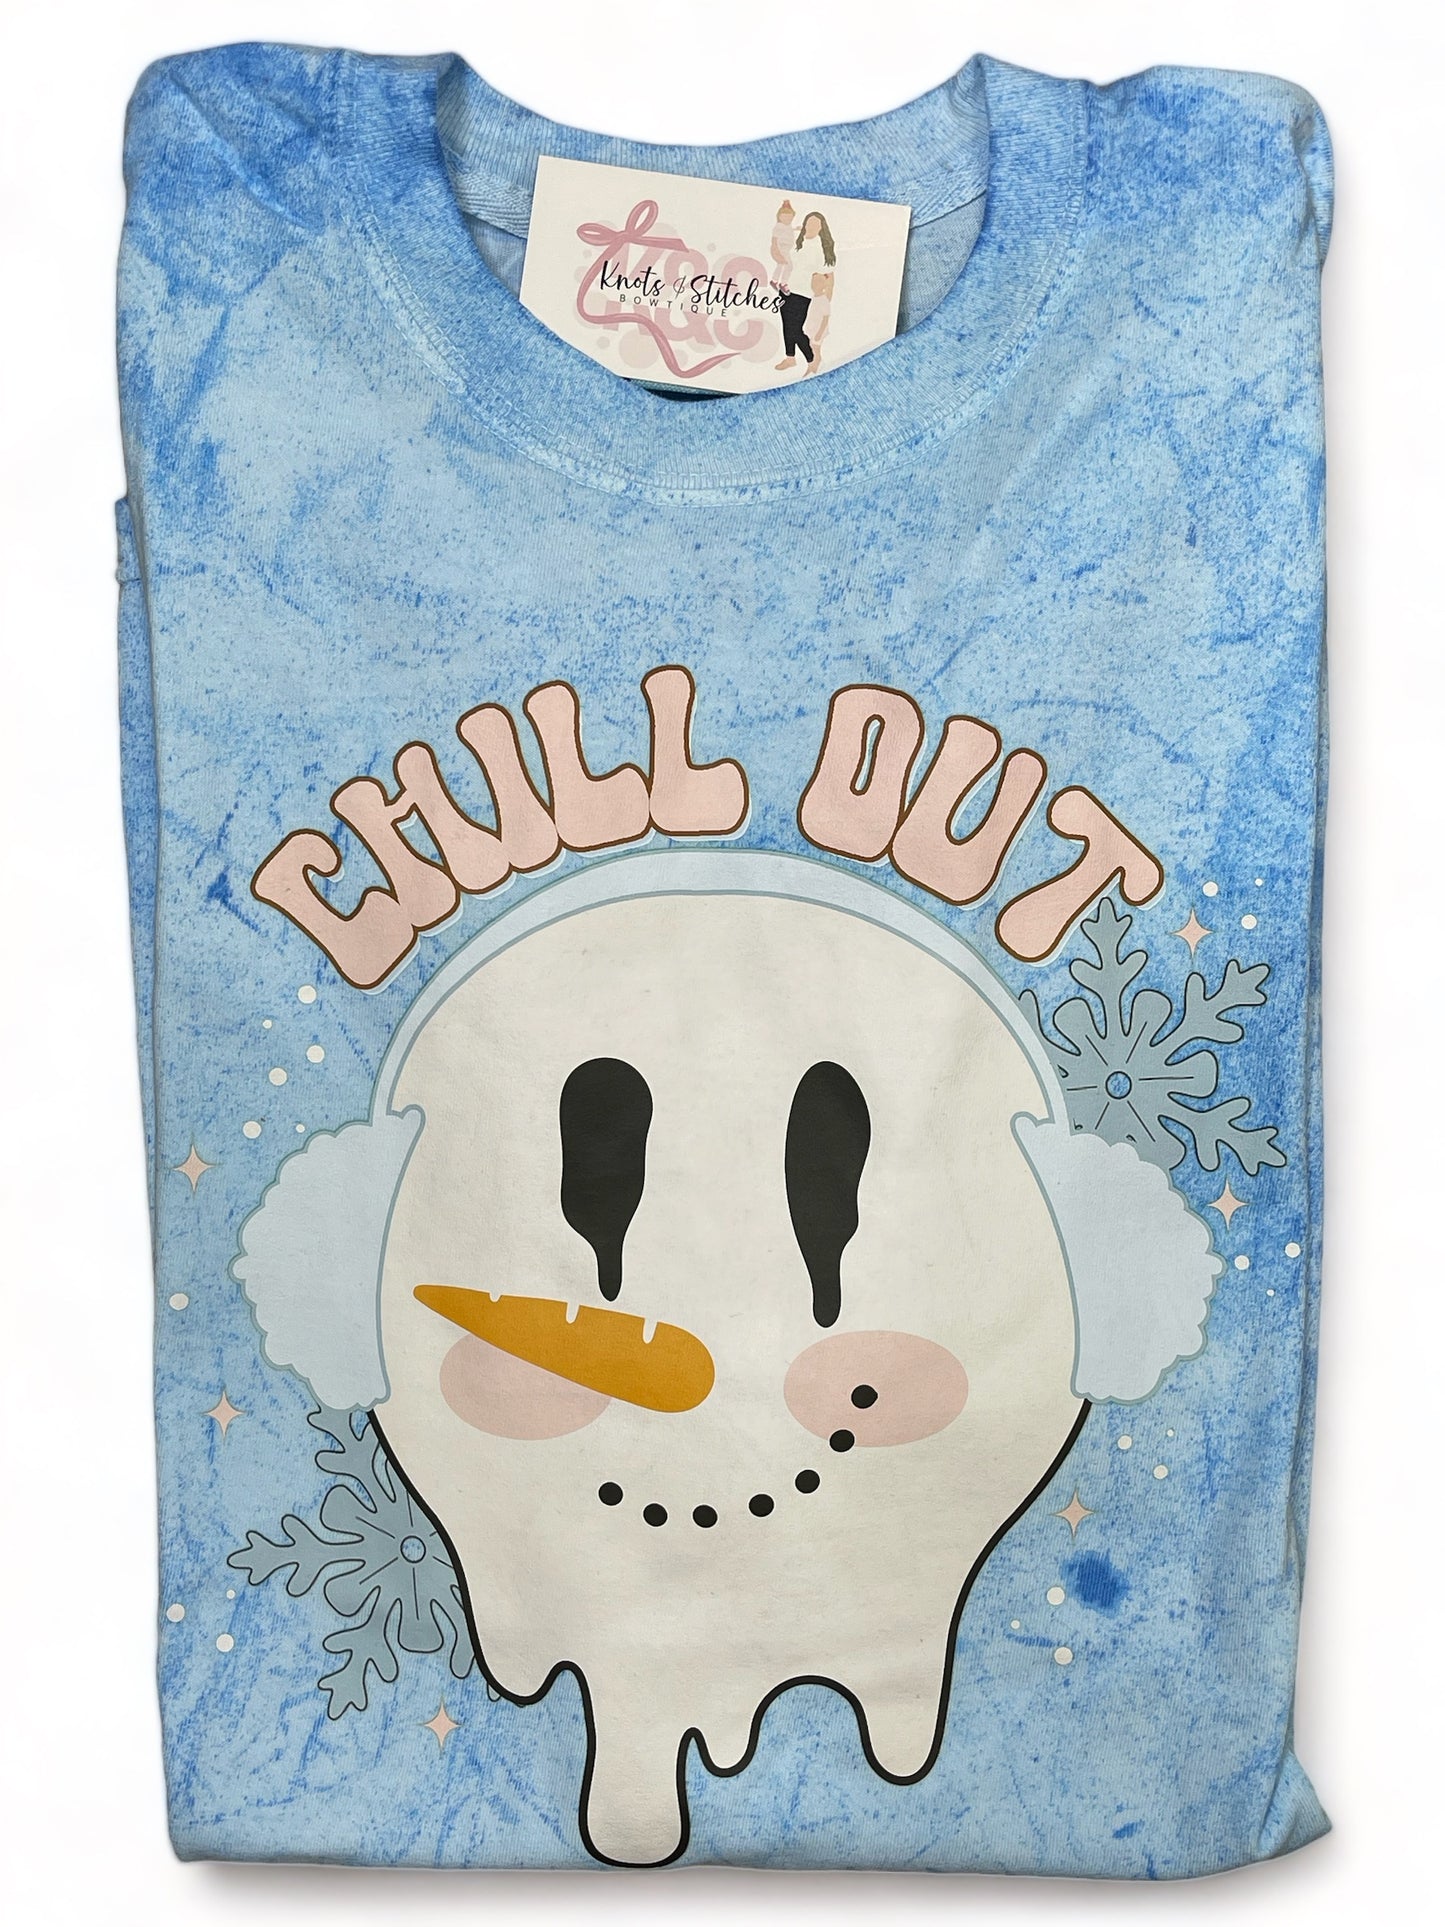 Chill out tee